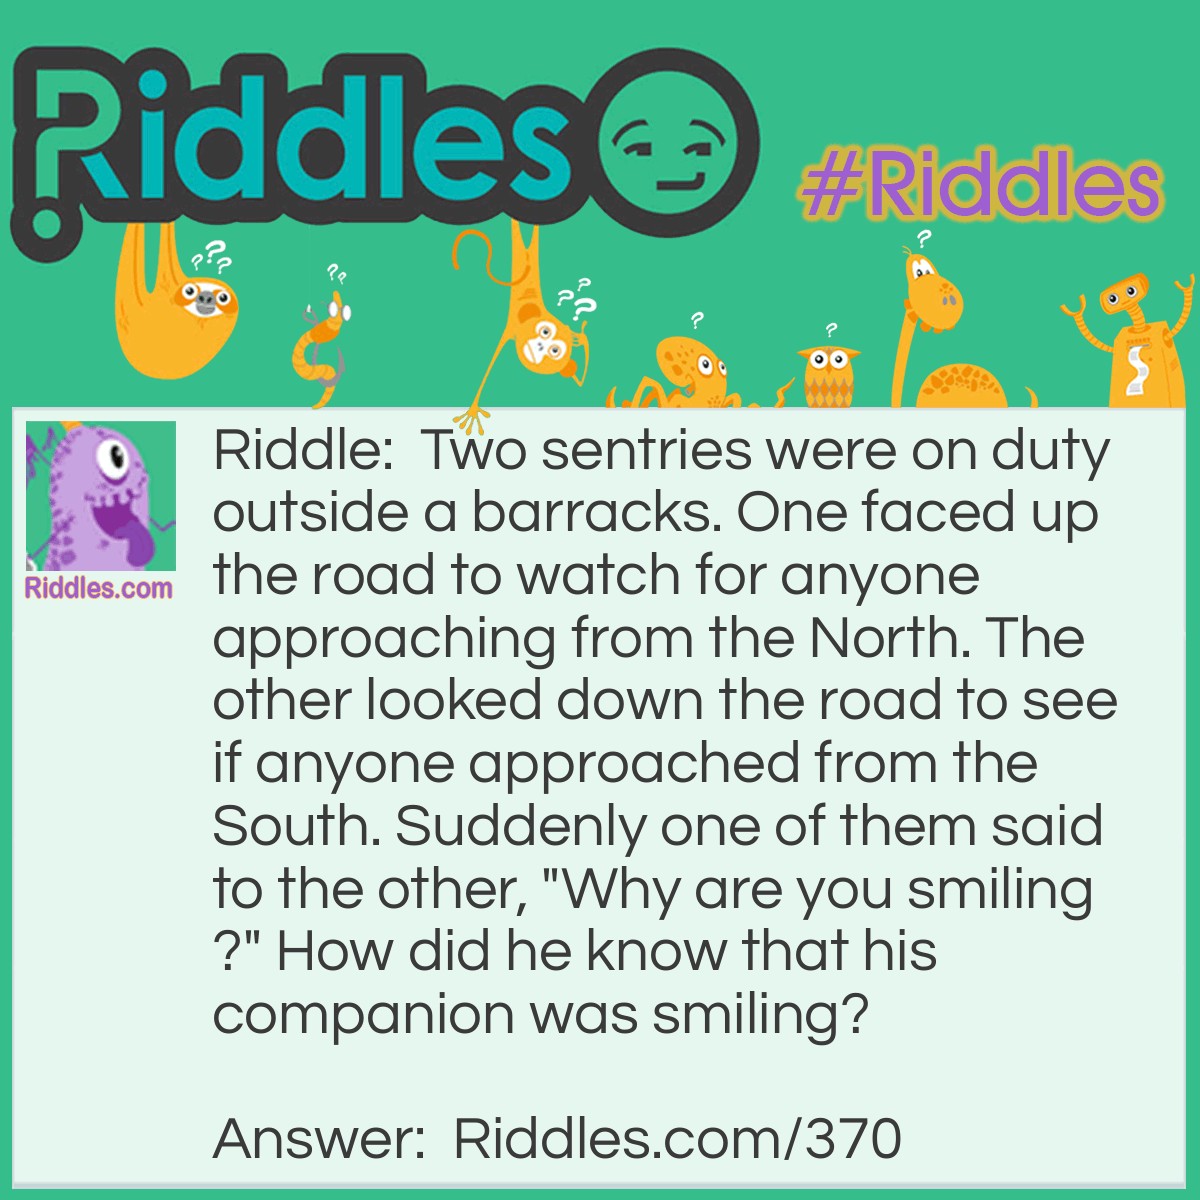 Riddle: Two sentries were on duty outside a barracks. One faced up the road to watch for anyone approaching from the North. The other looked down the road to see if anyone approached from the South. Suddenly one of them said to the other, "Why are you smiling?" How did he know that his companion was <a href="https://www.riddles.com/funny-riddles">smiling</a>? Answer: Although the guards were looking in opposite directions, they were not back to back. They were facing each other.